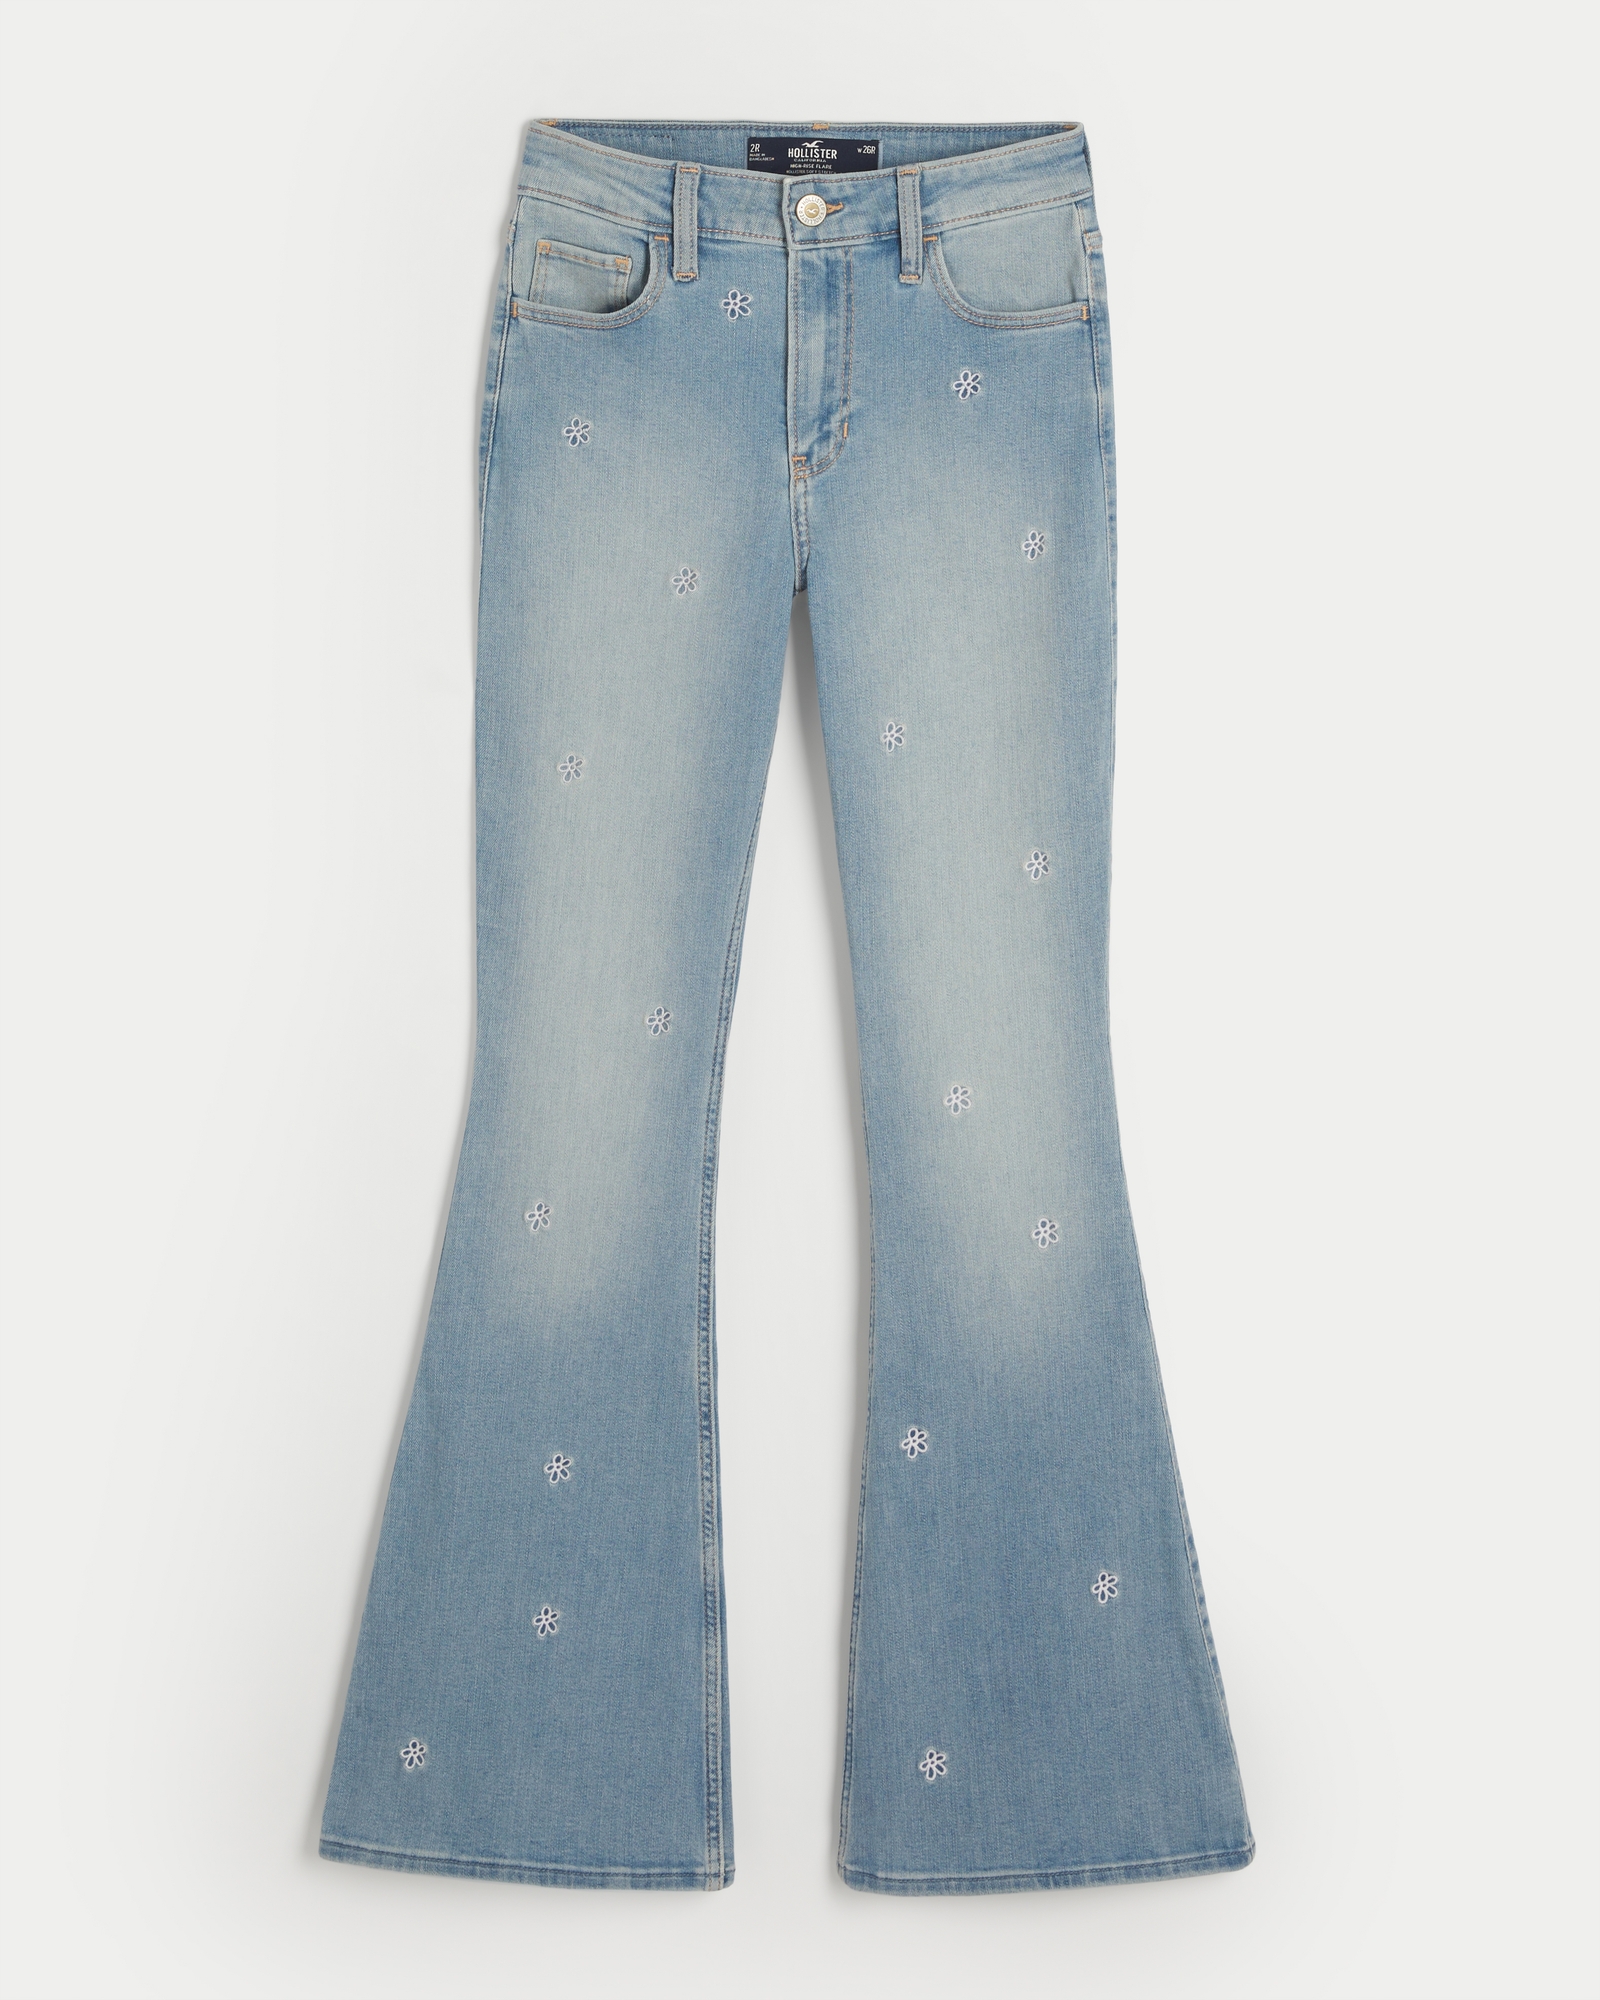 Women's High-Rise Ripped Light Wash Flare Jeans